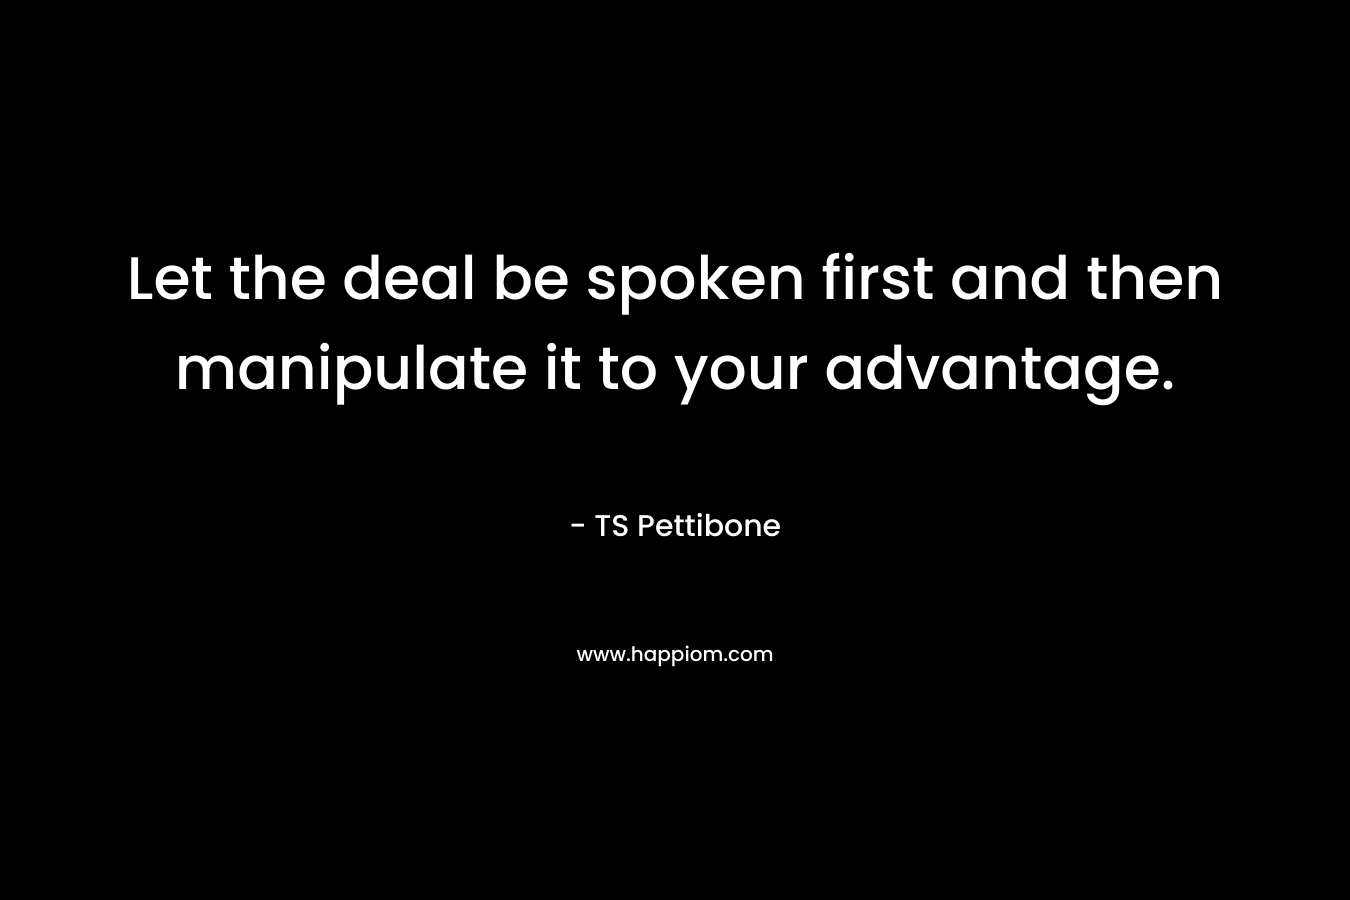 Let the deal be spoken first and then manipulate it to your advantage.